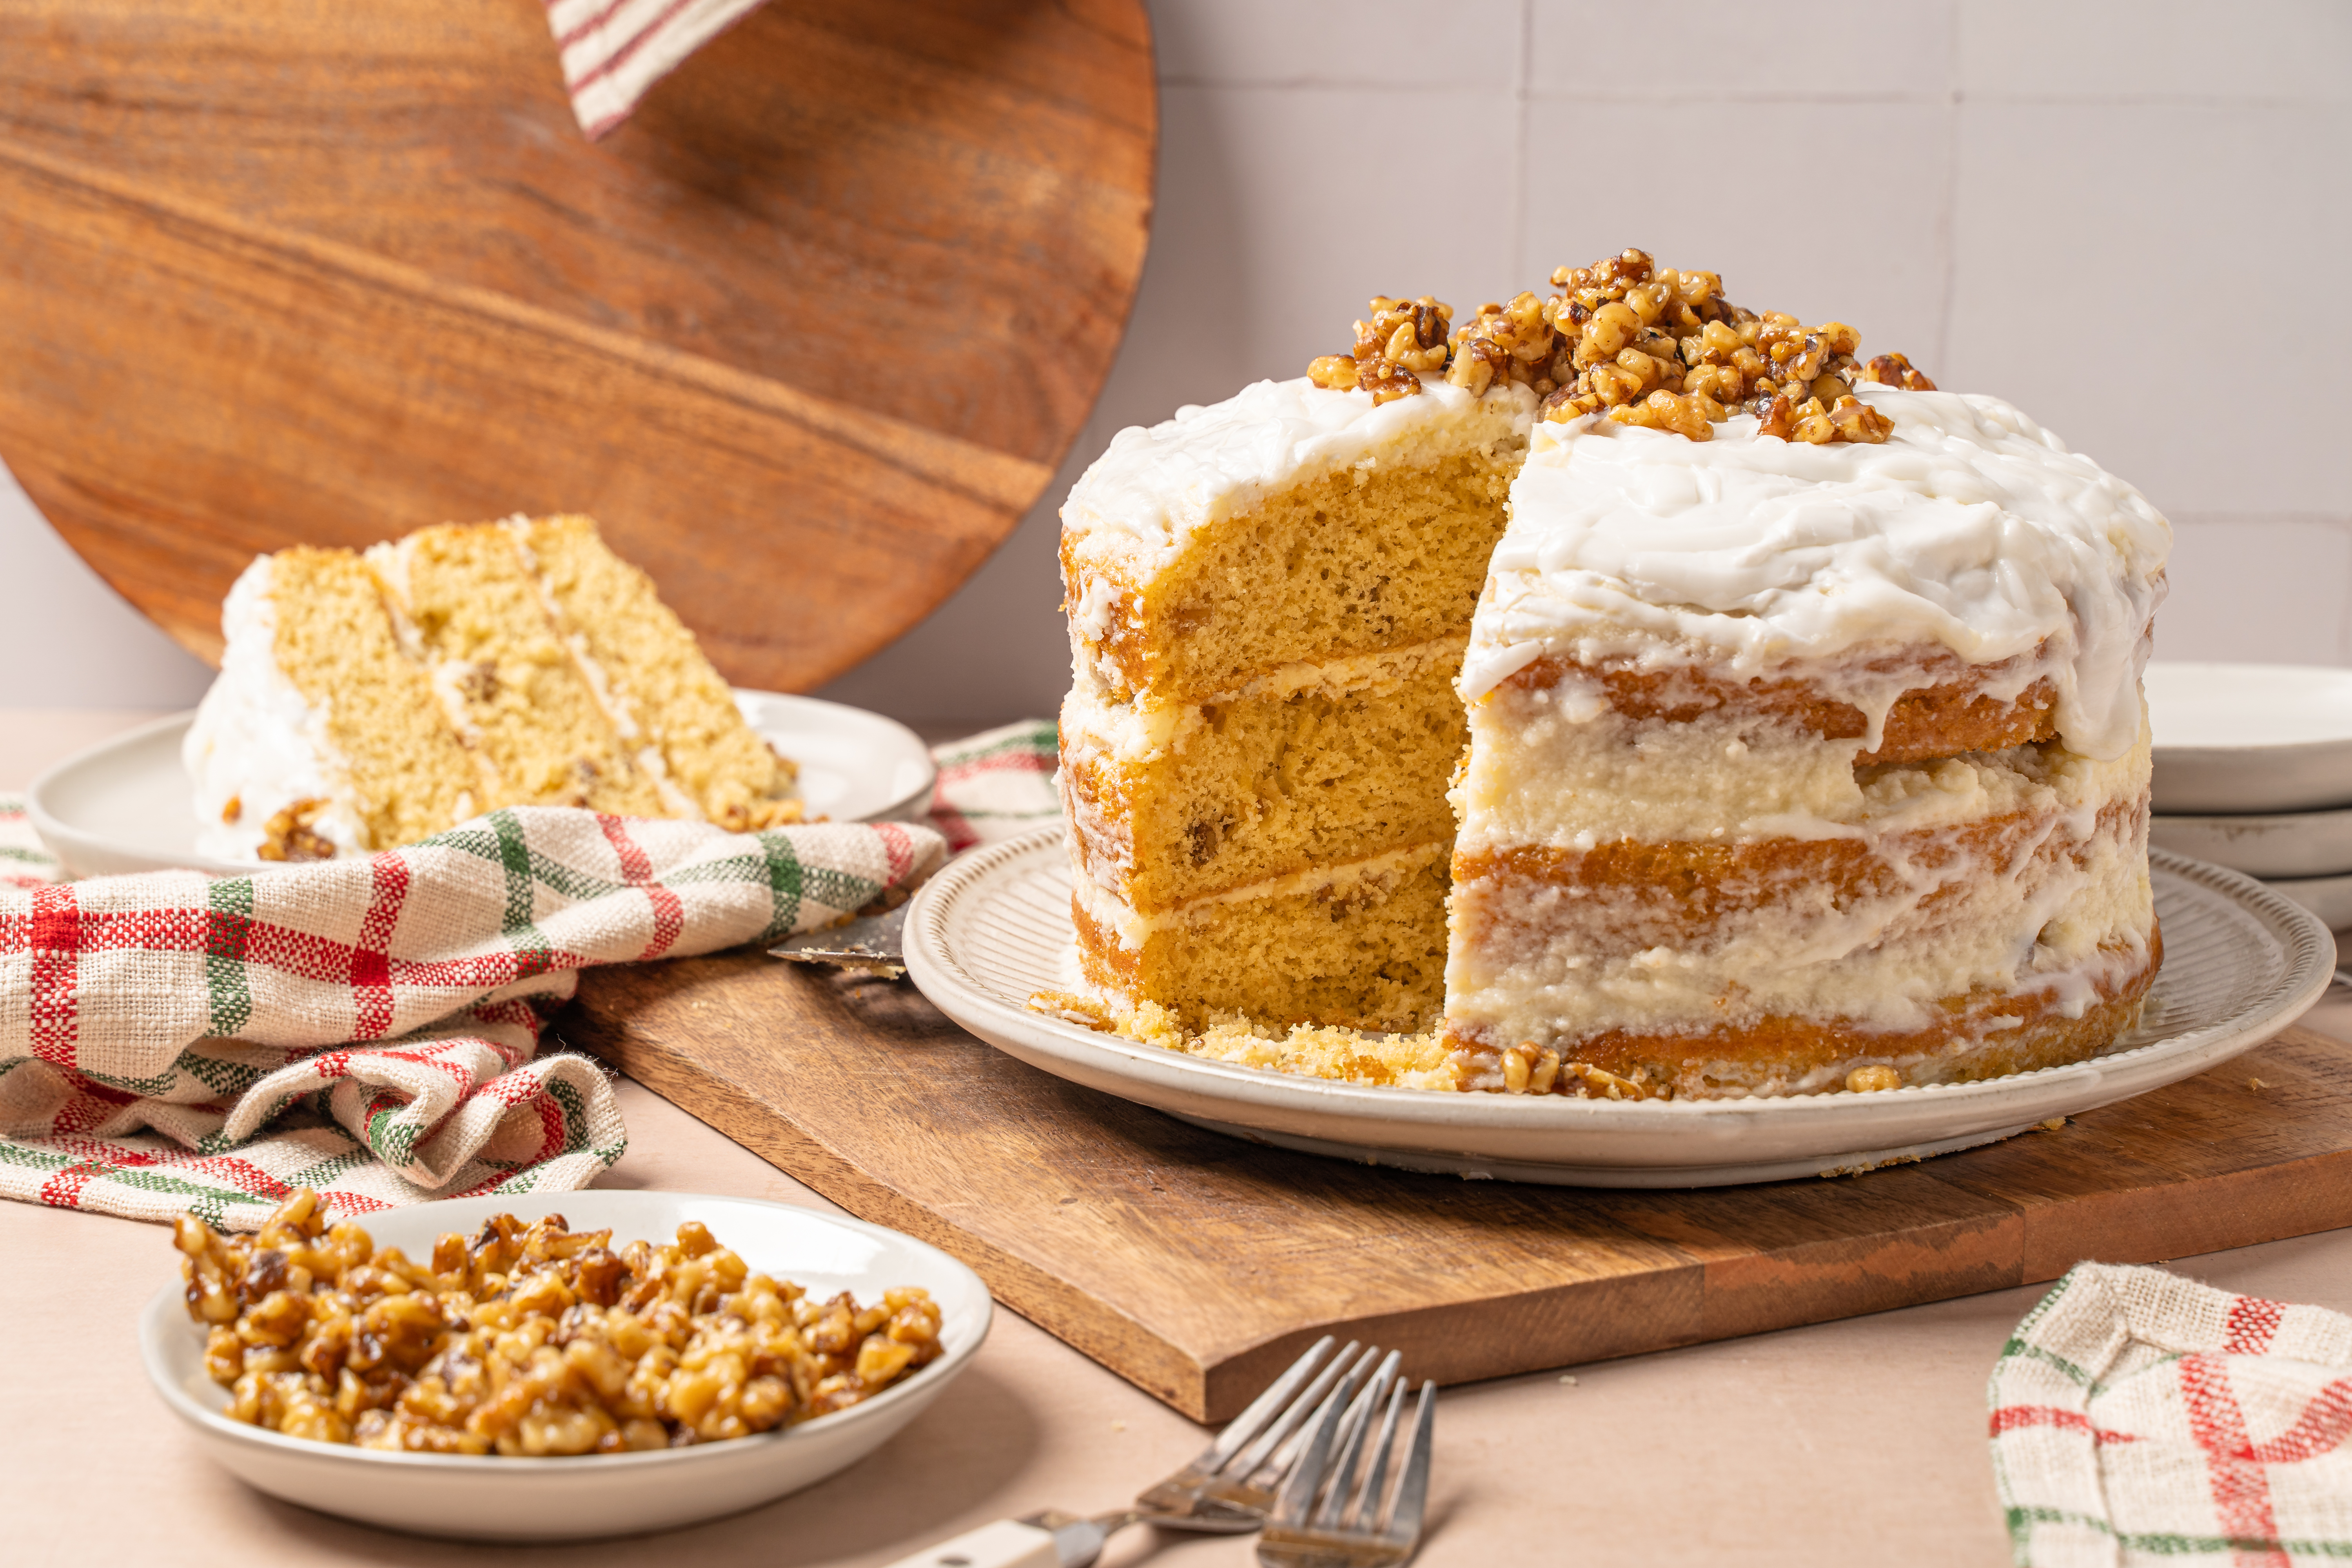 Apple Spice Cake with Cinnamon Buttercream Frosting - This Delicious House